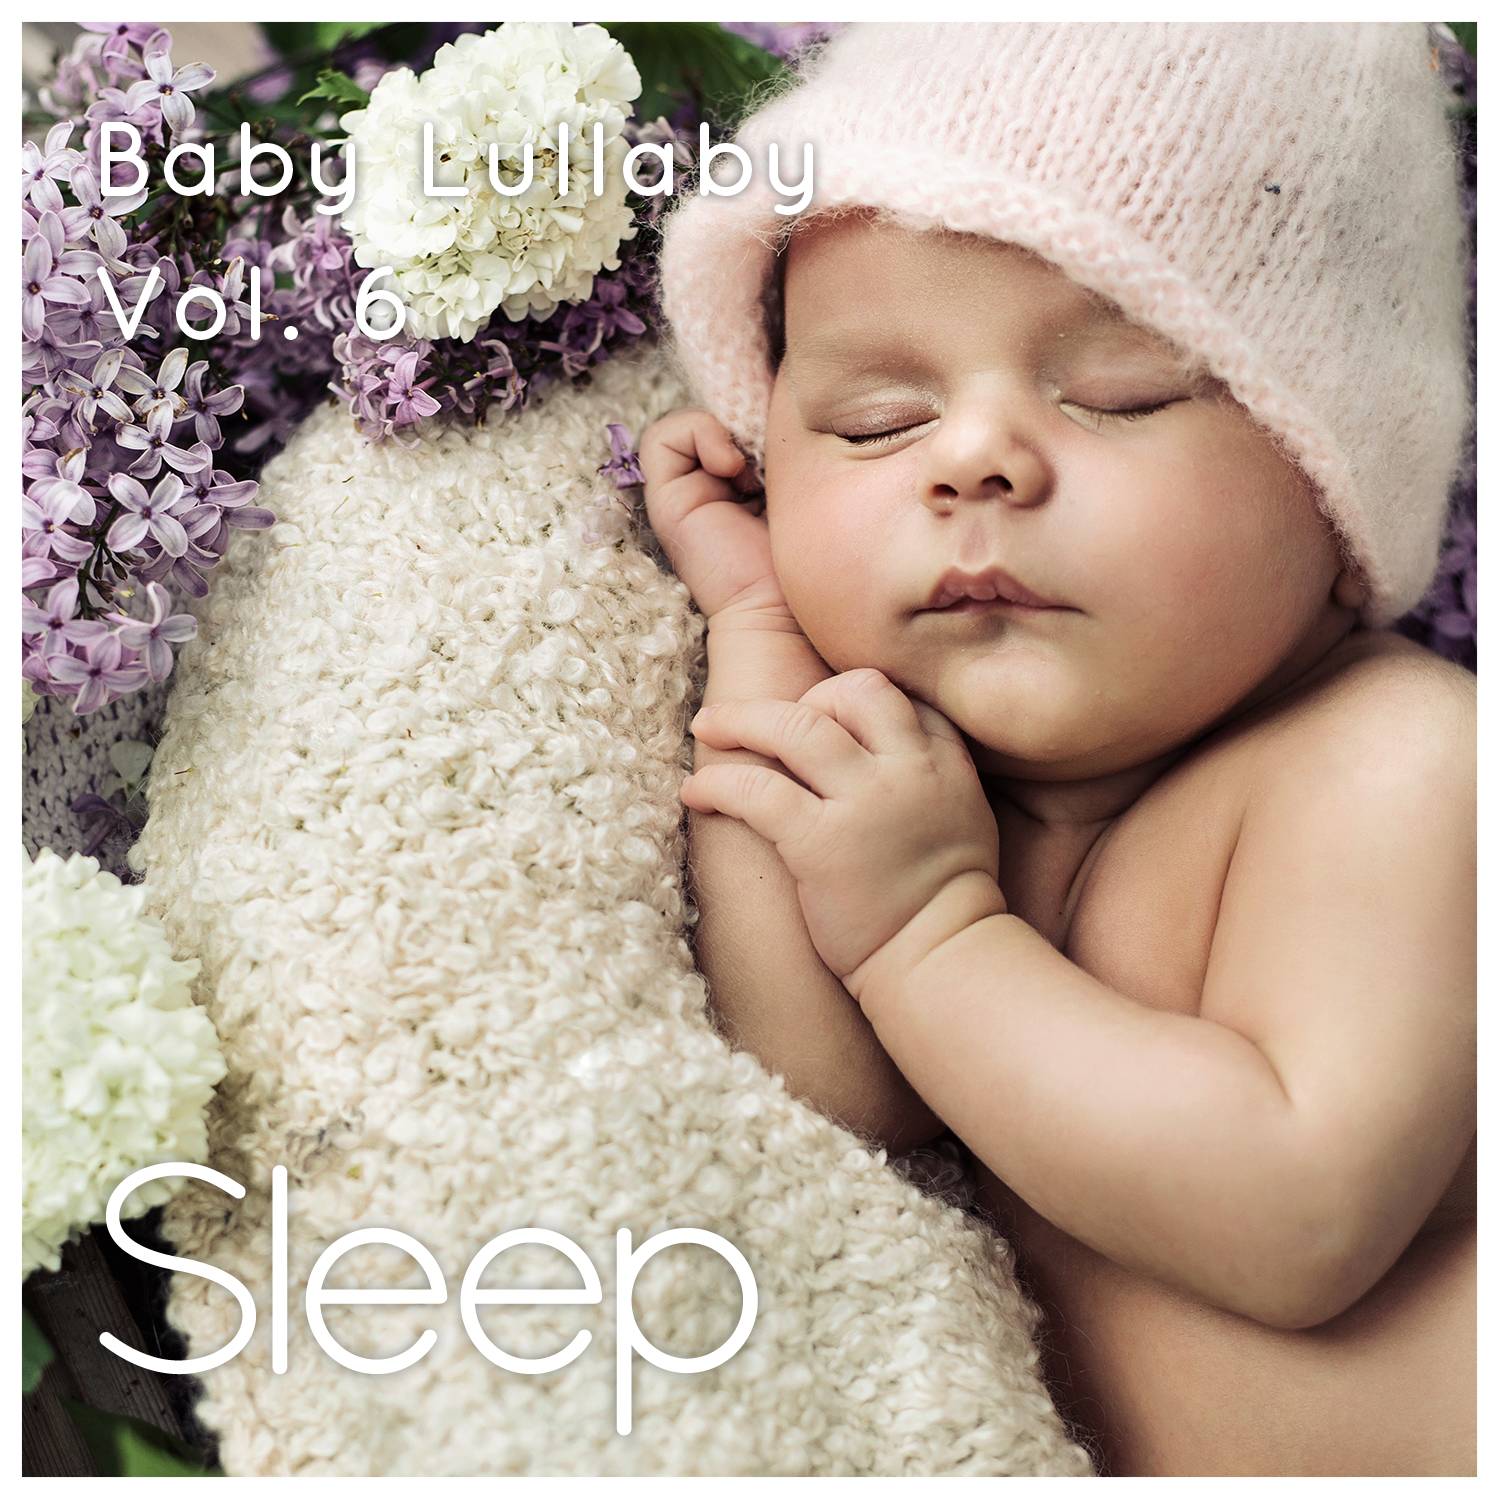 Baby Sleep Ambient Lullaby, Pt. 30